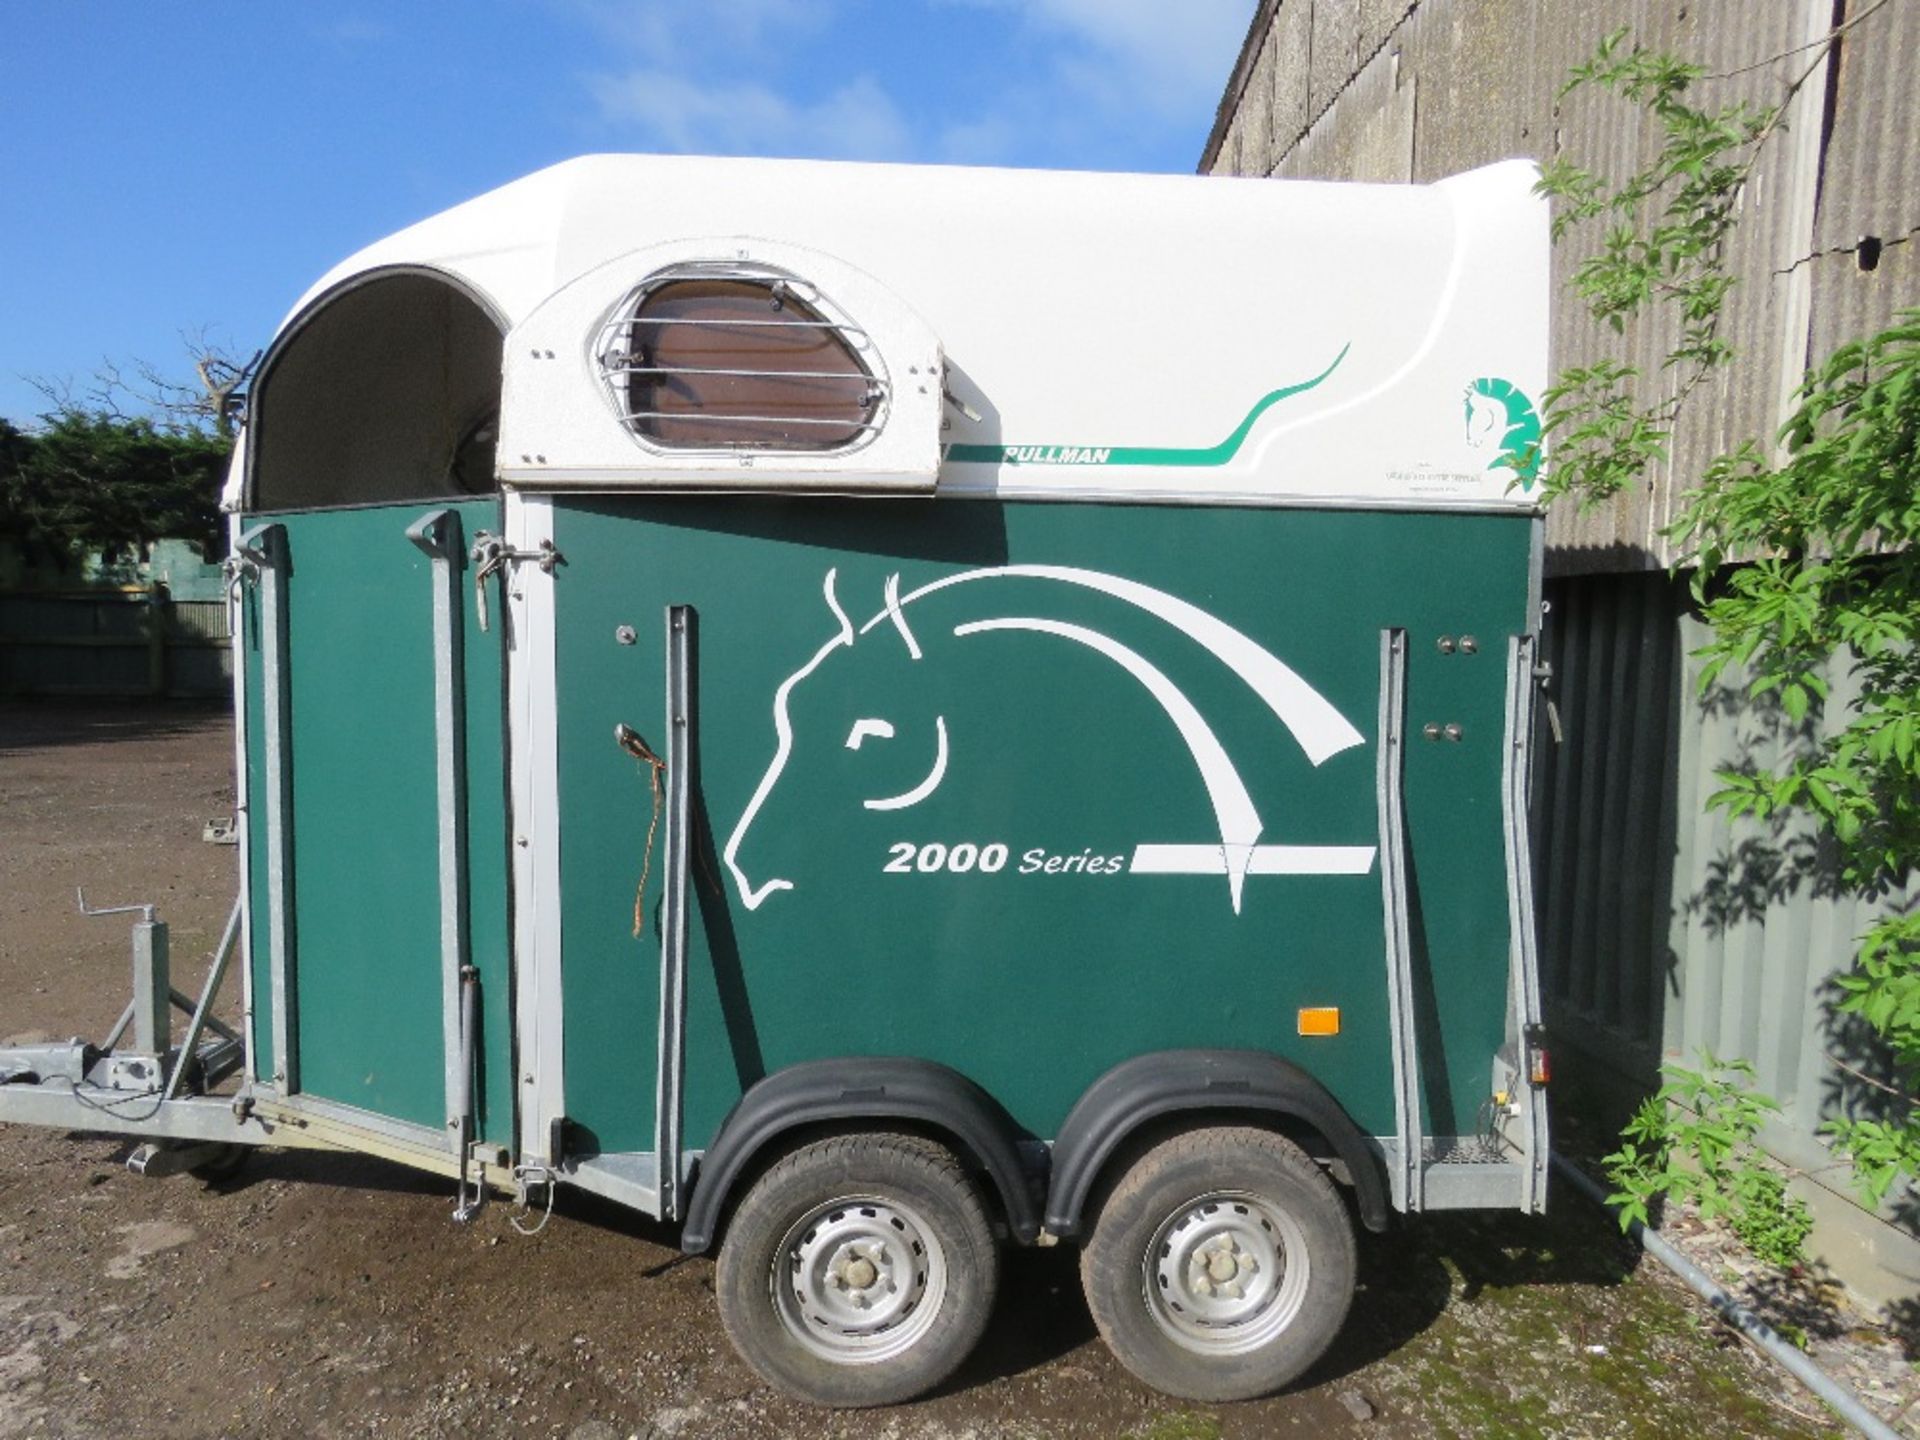 PULLMAN CHEVAL LIBERTE 2000 SERIES / TYPE 2003 HORSE TRAILER WITH FRONT AND REAR RAMPS. YEAR 2008 BU - Image 9 of 10